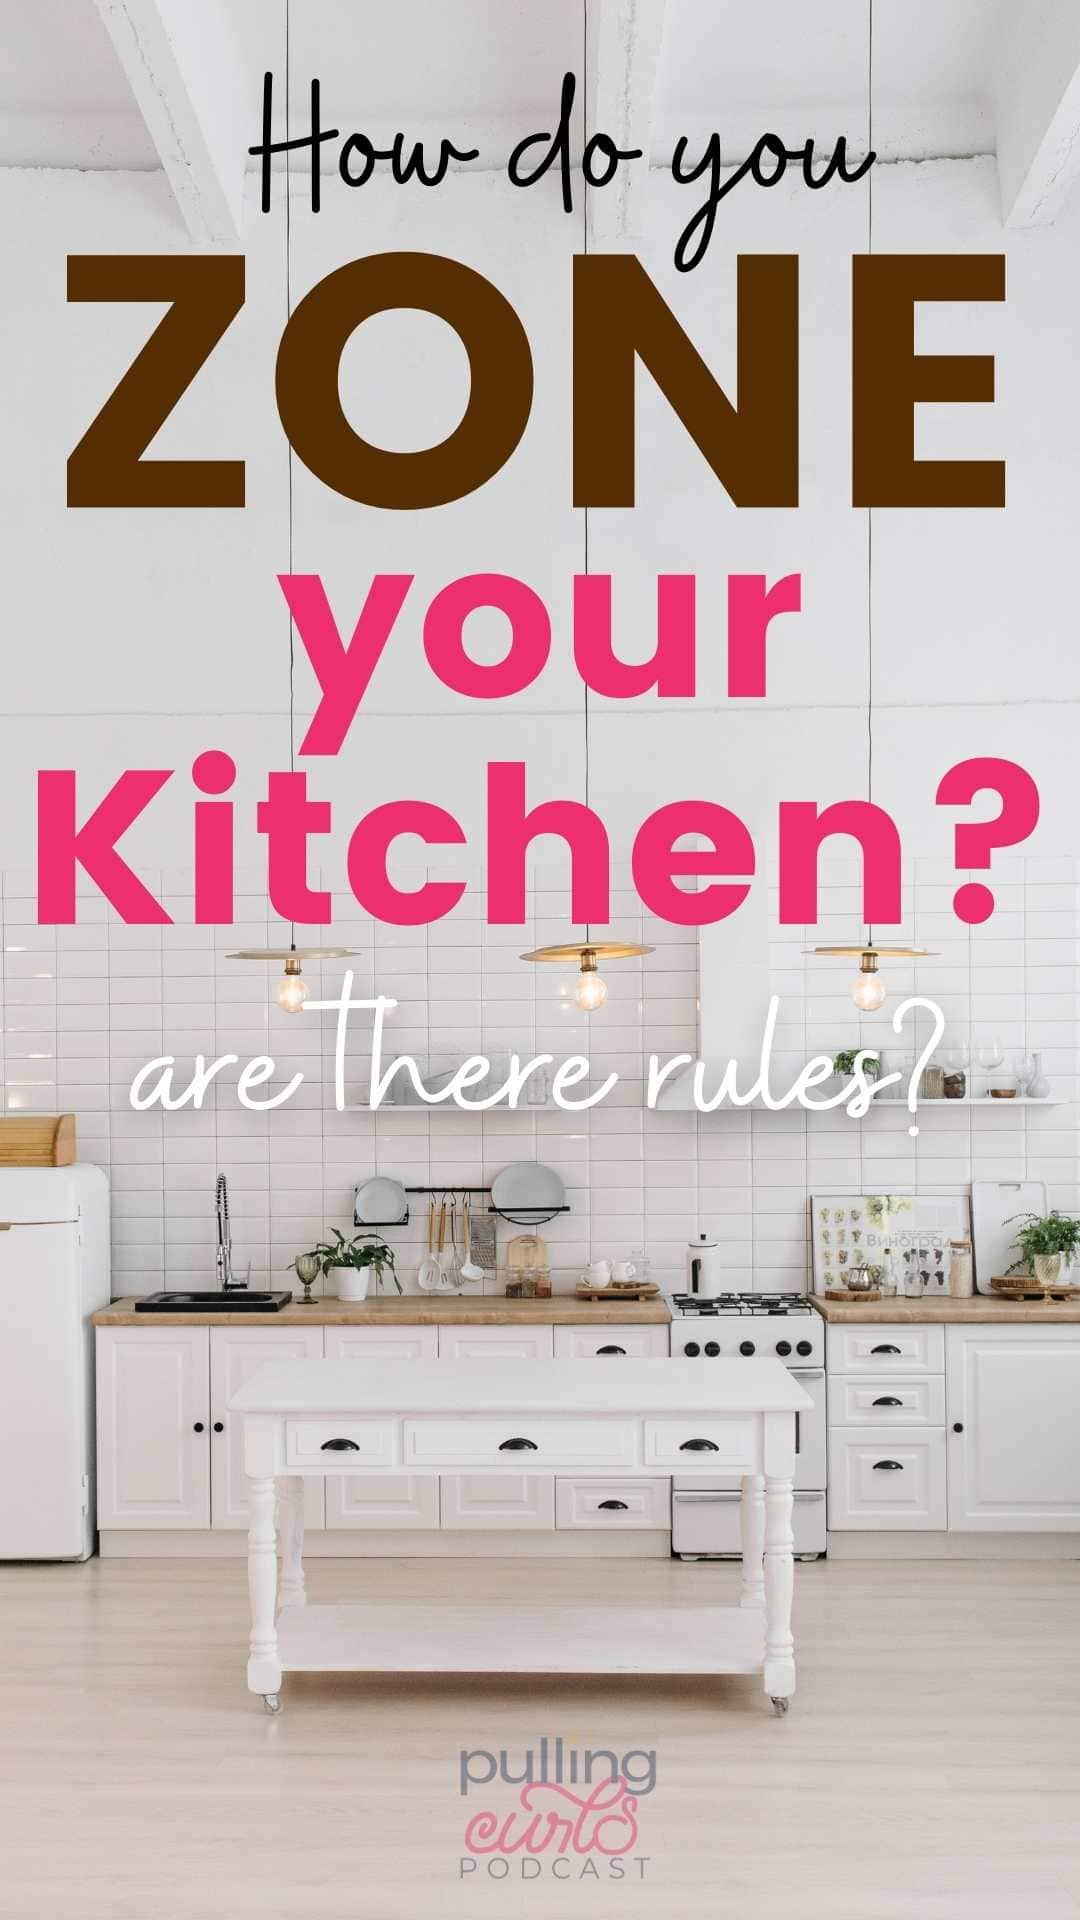 Zoning your kitchen is one of the most important things you can do to make things easier to do in that room. Today we're talking about some of the stigmas and "rules" you might be following that aren't helping you in your kitchen. via @pullingcurls